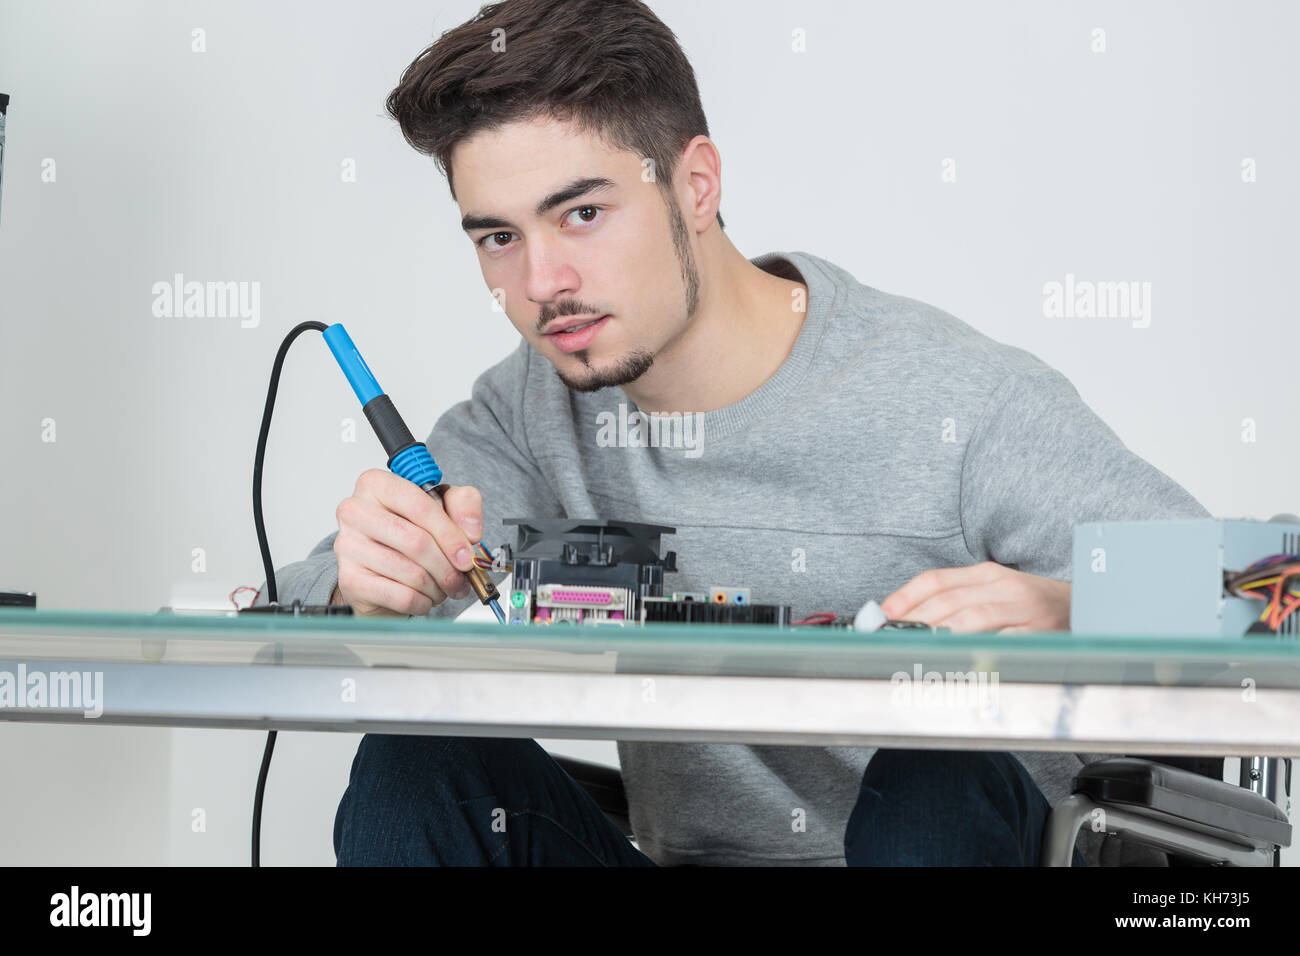 View your shopping cart. young man holding soldering iron Stock Photo. 